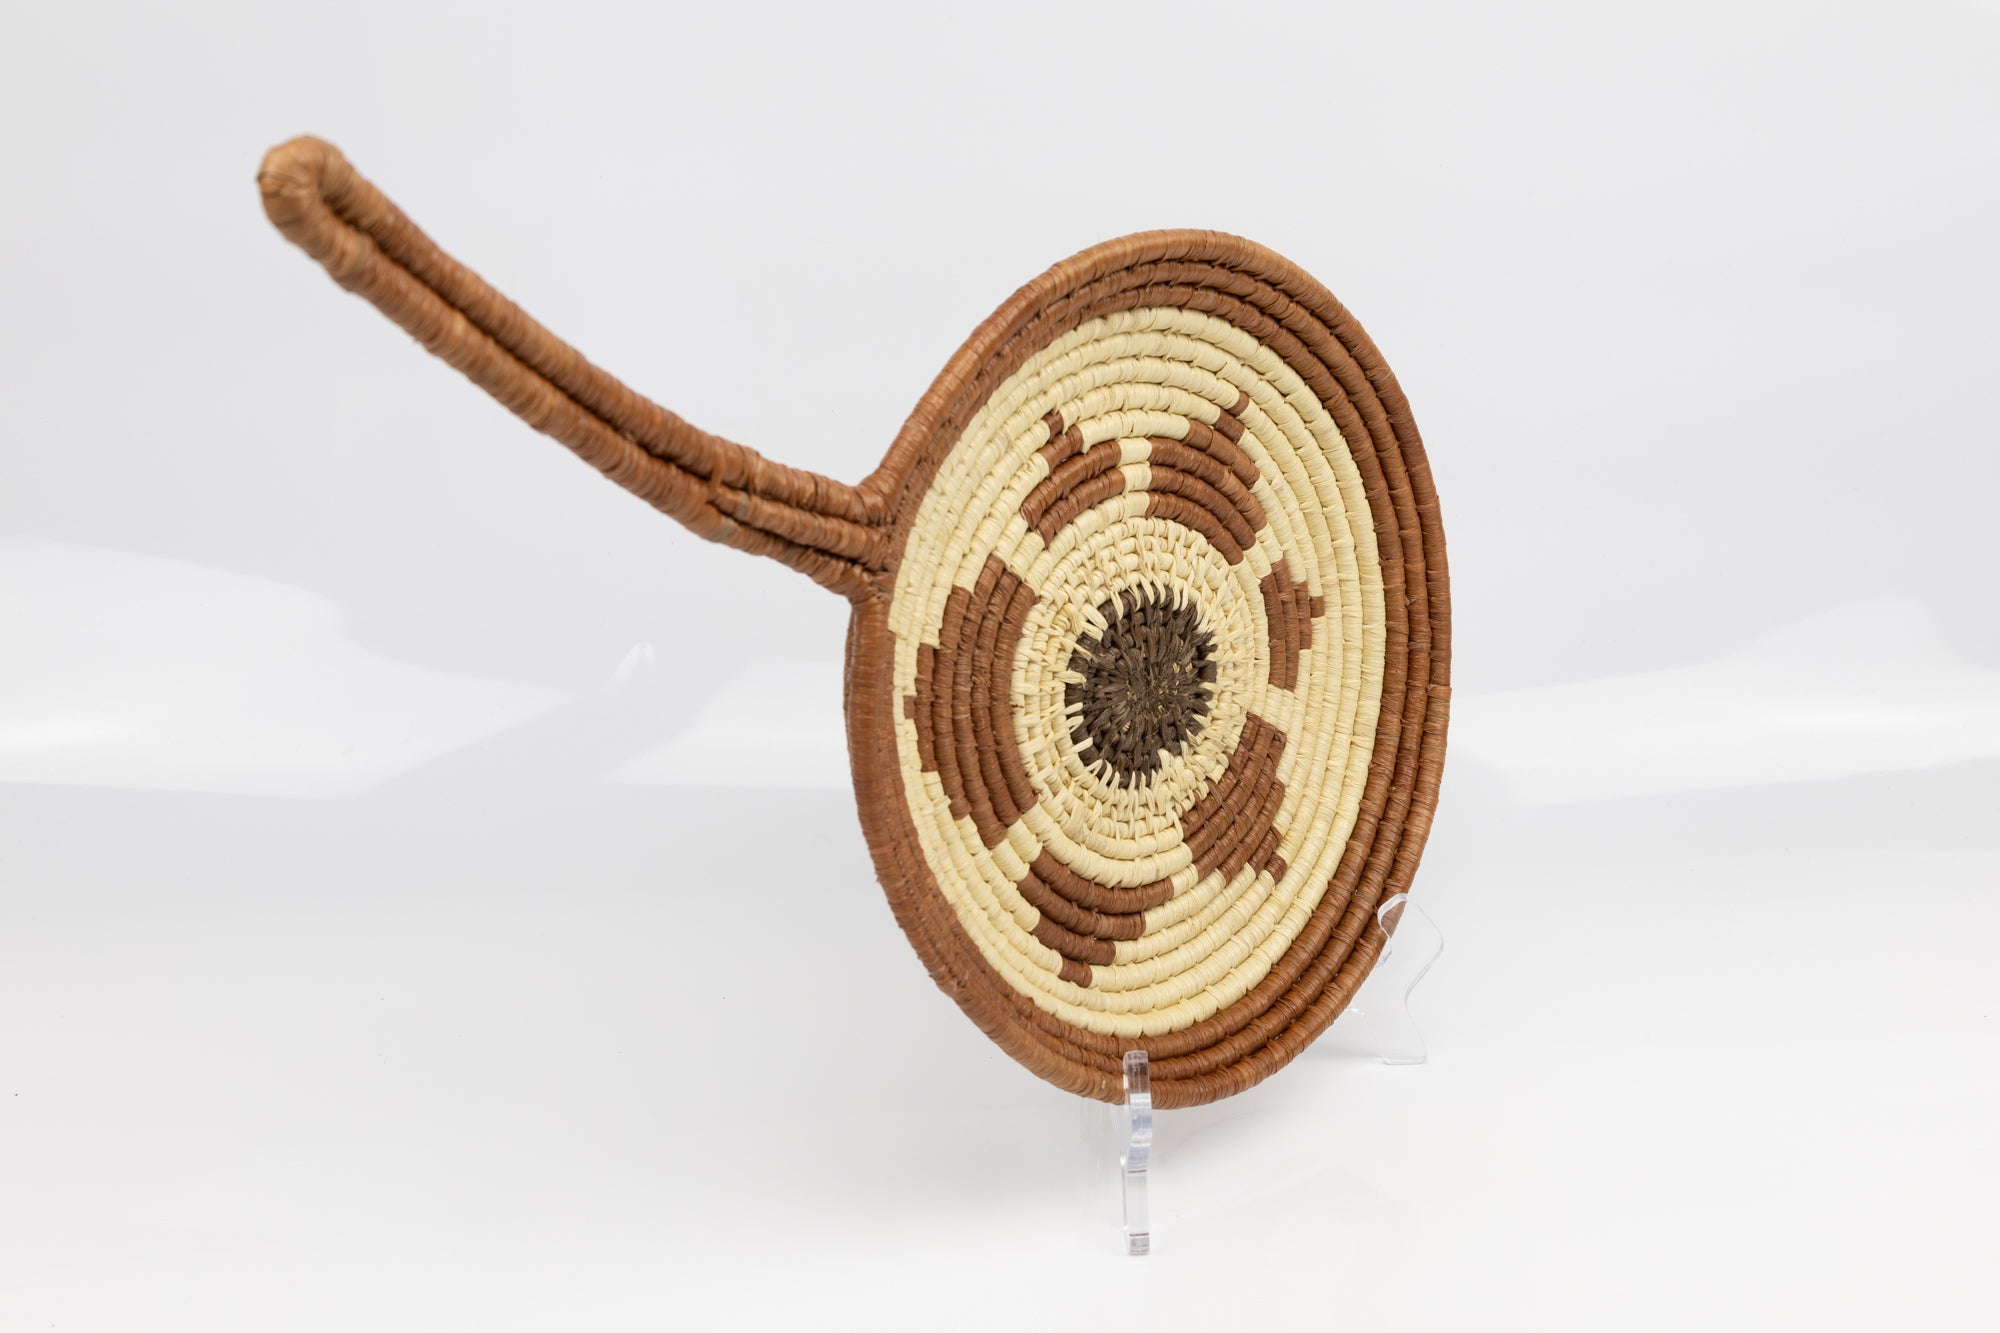 Hand woven plate basket with frying pan design. Palm fiber natural dyes and reed. Woven in Panama.